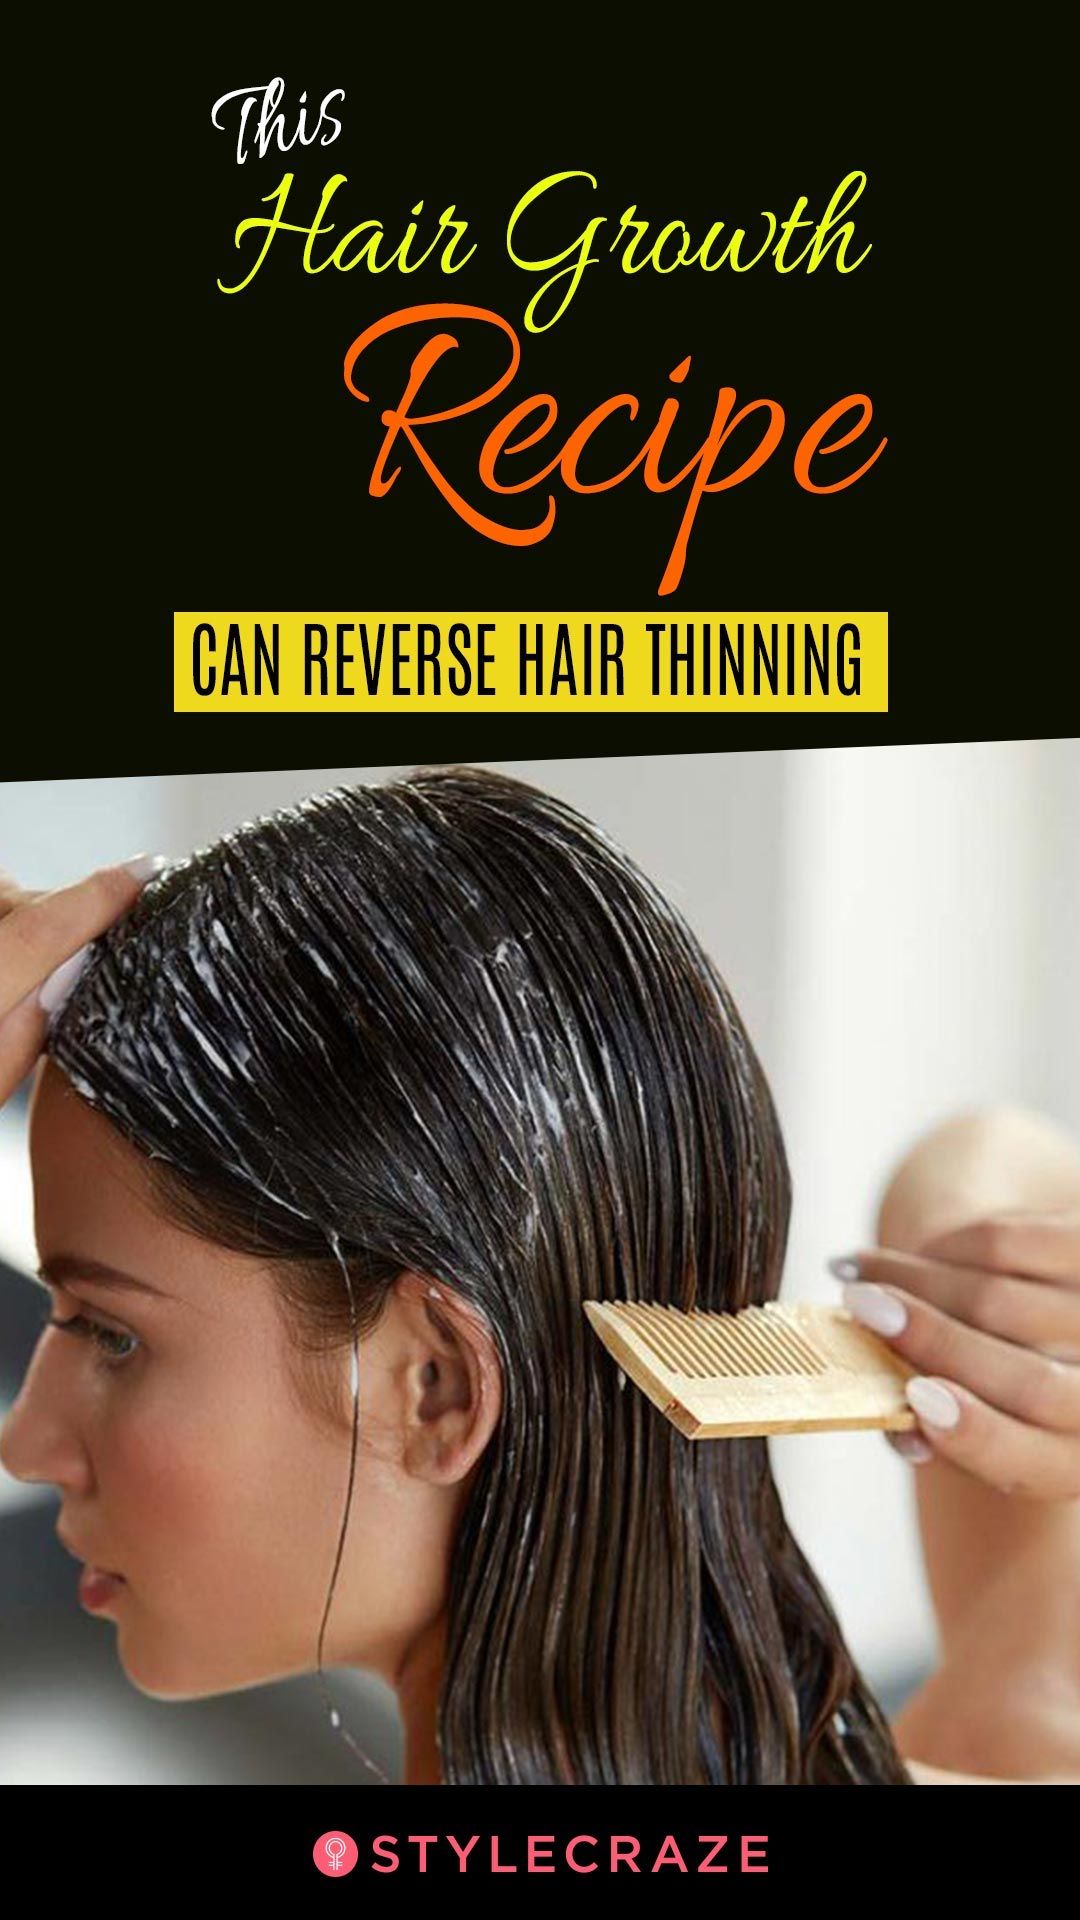 This Hair Growth Recipe Can Reverse Hair Thinning. Give It A Try â You ...